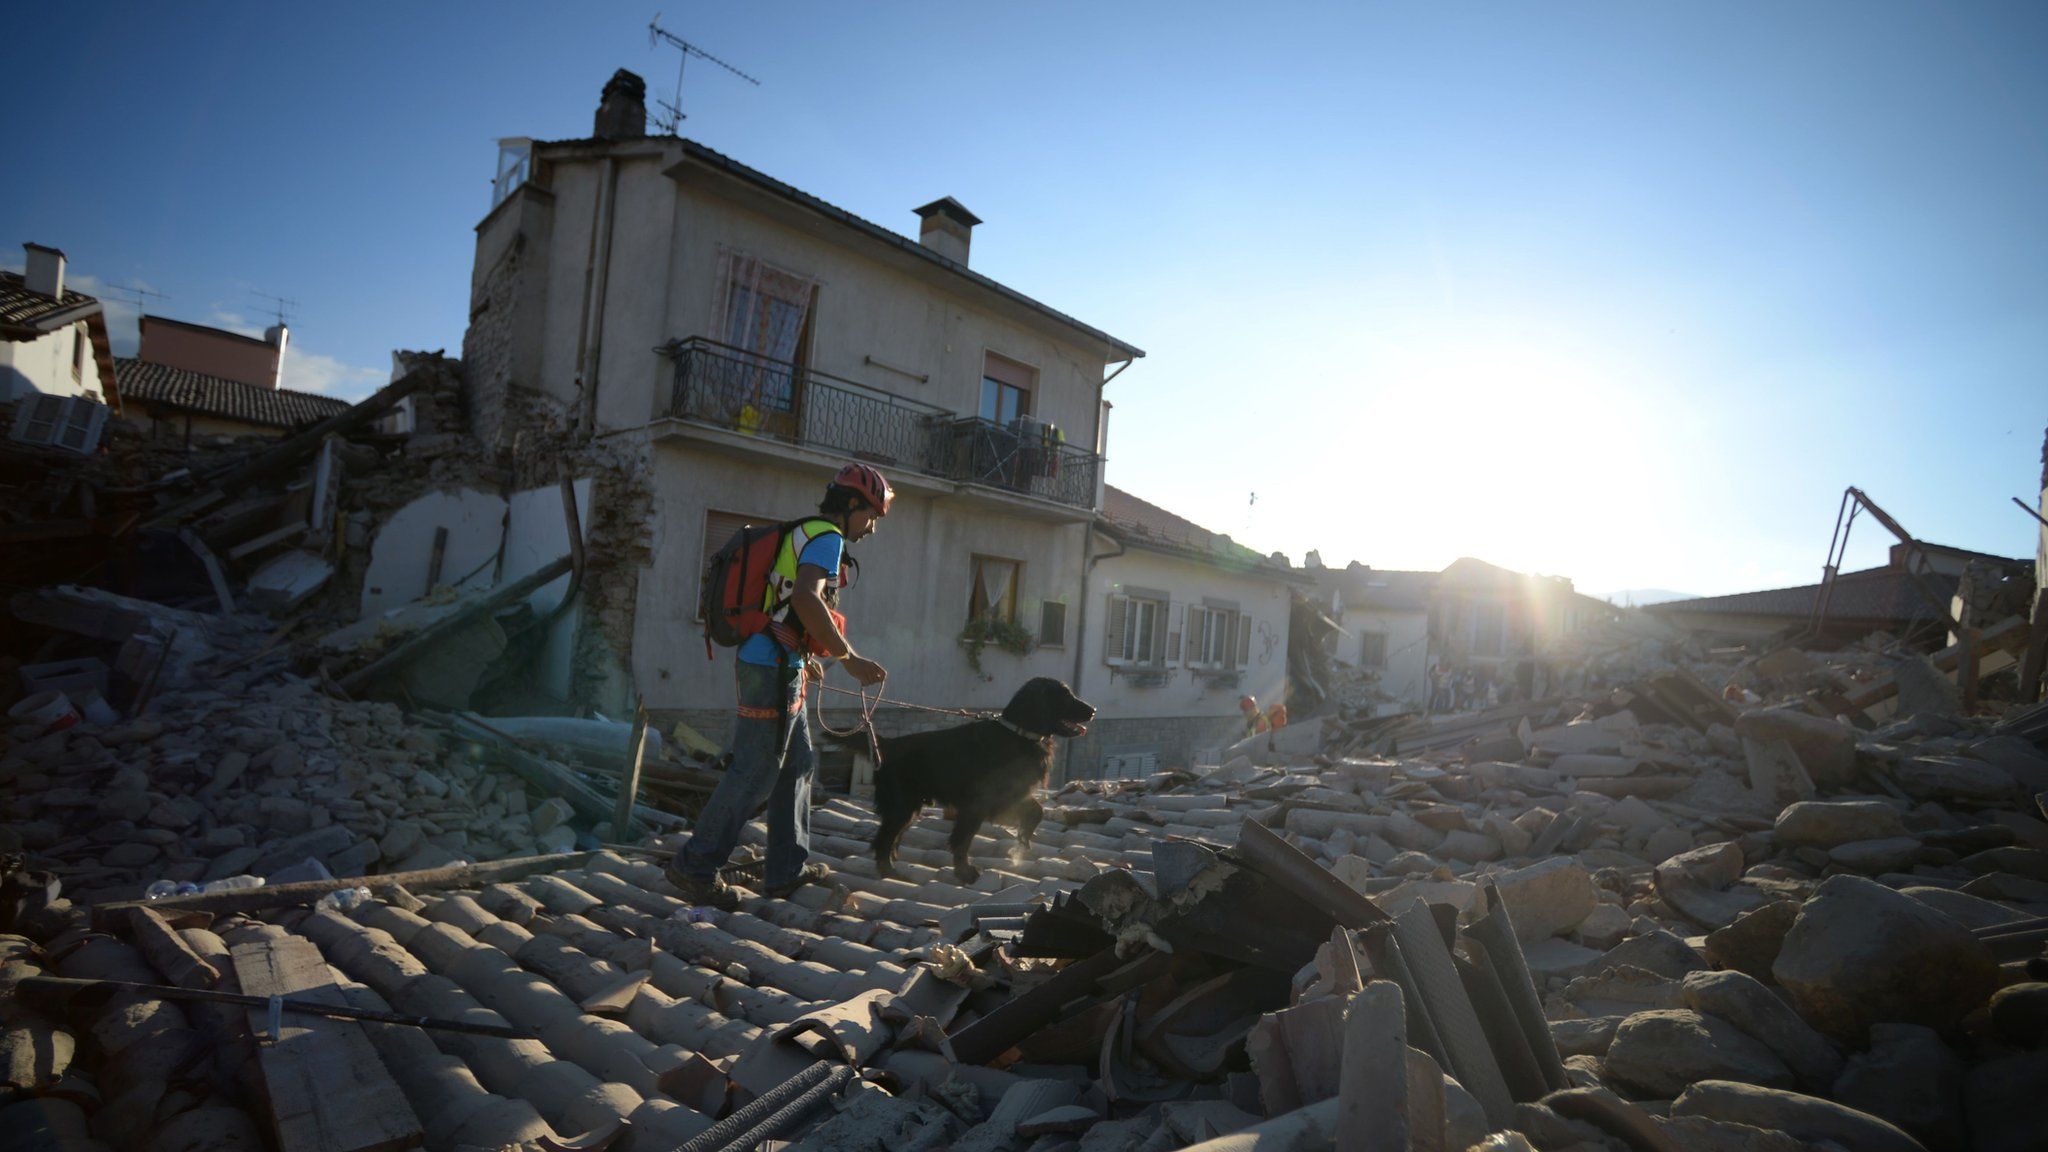 Emergency services personnel searches for victims with a dog in the central Italian village of Amatrice, on August 24, 2016